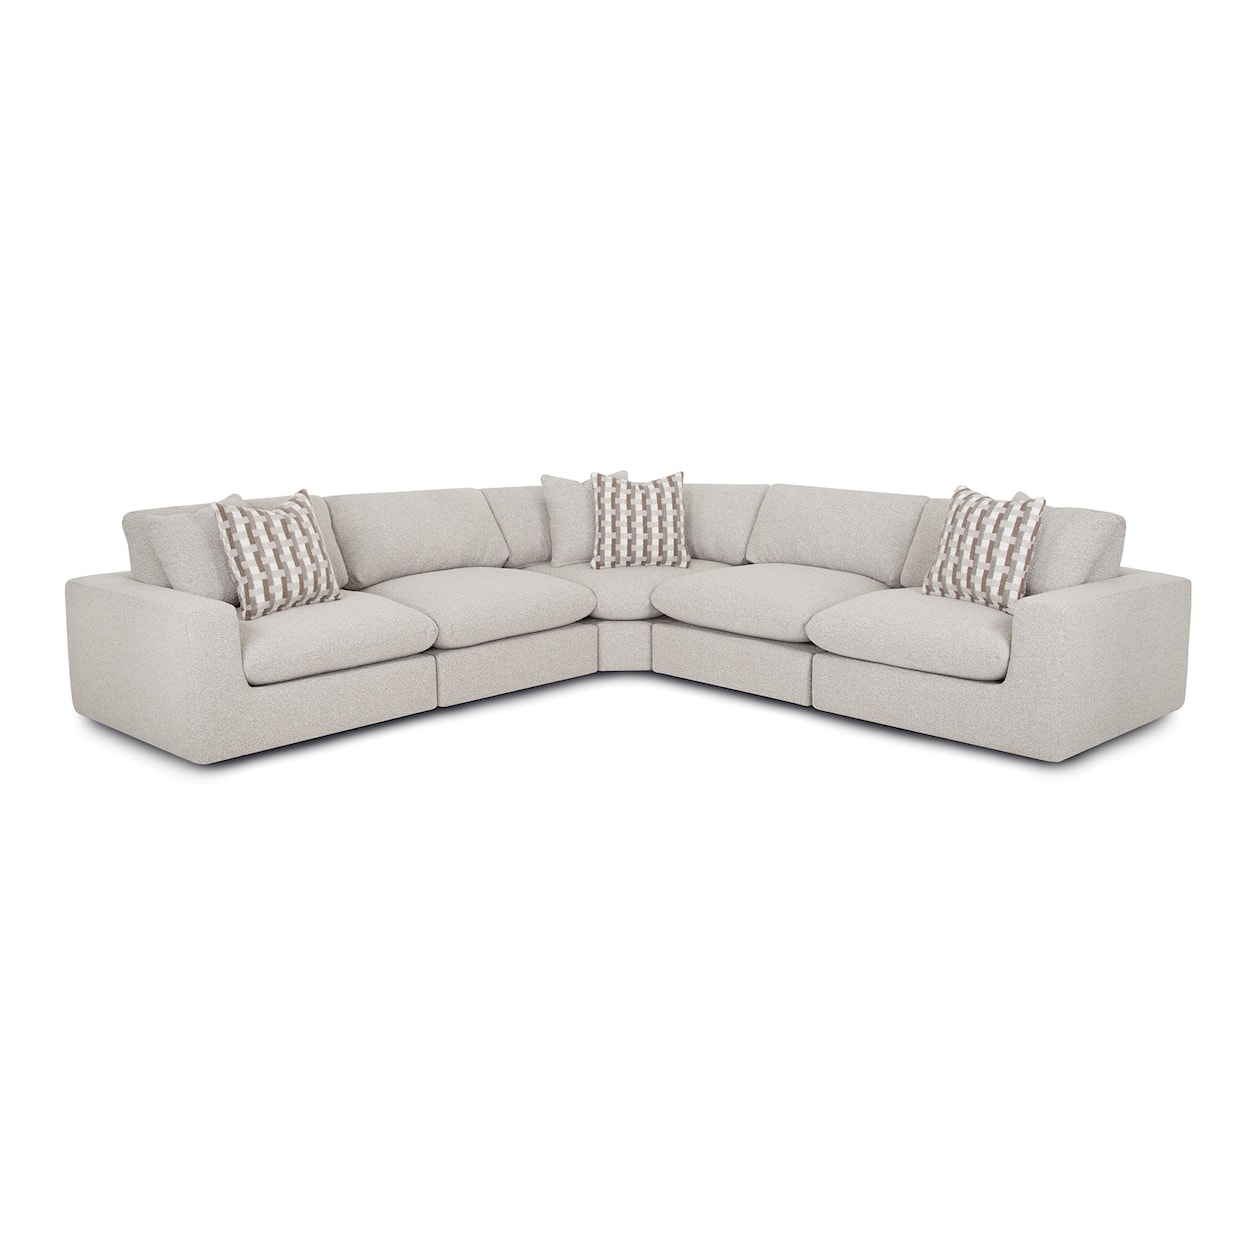 Franklin 972 Marcella Living Room Set with Ottoman